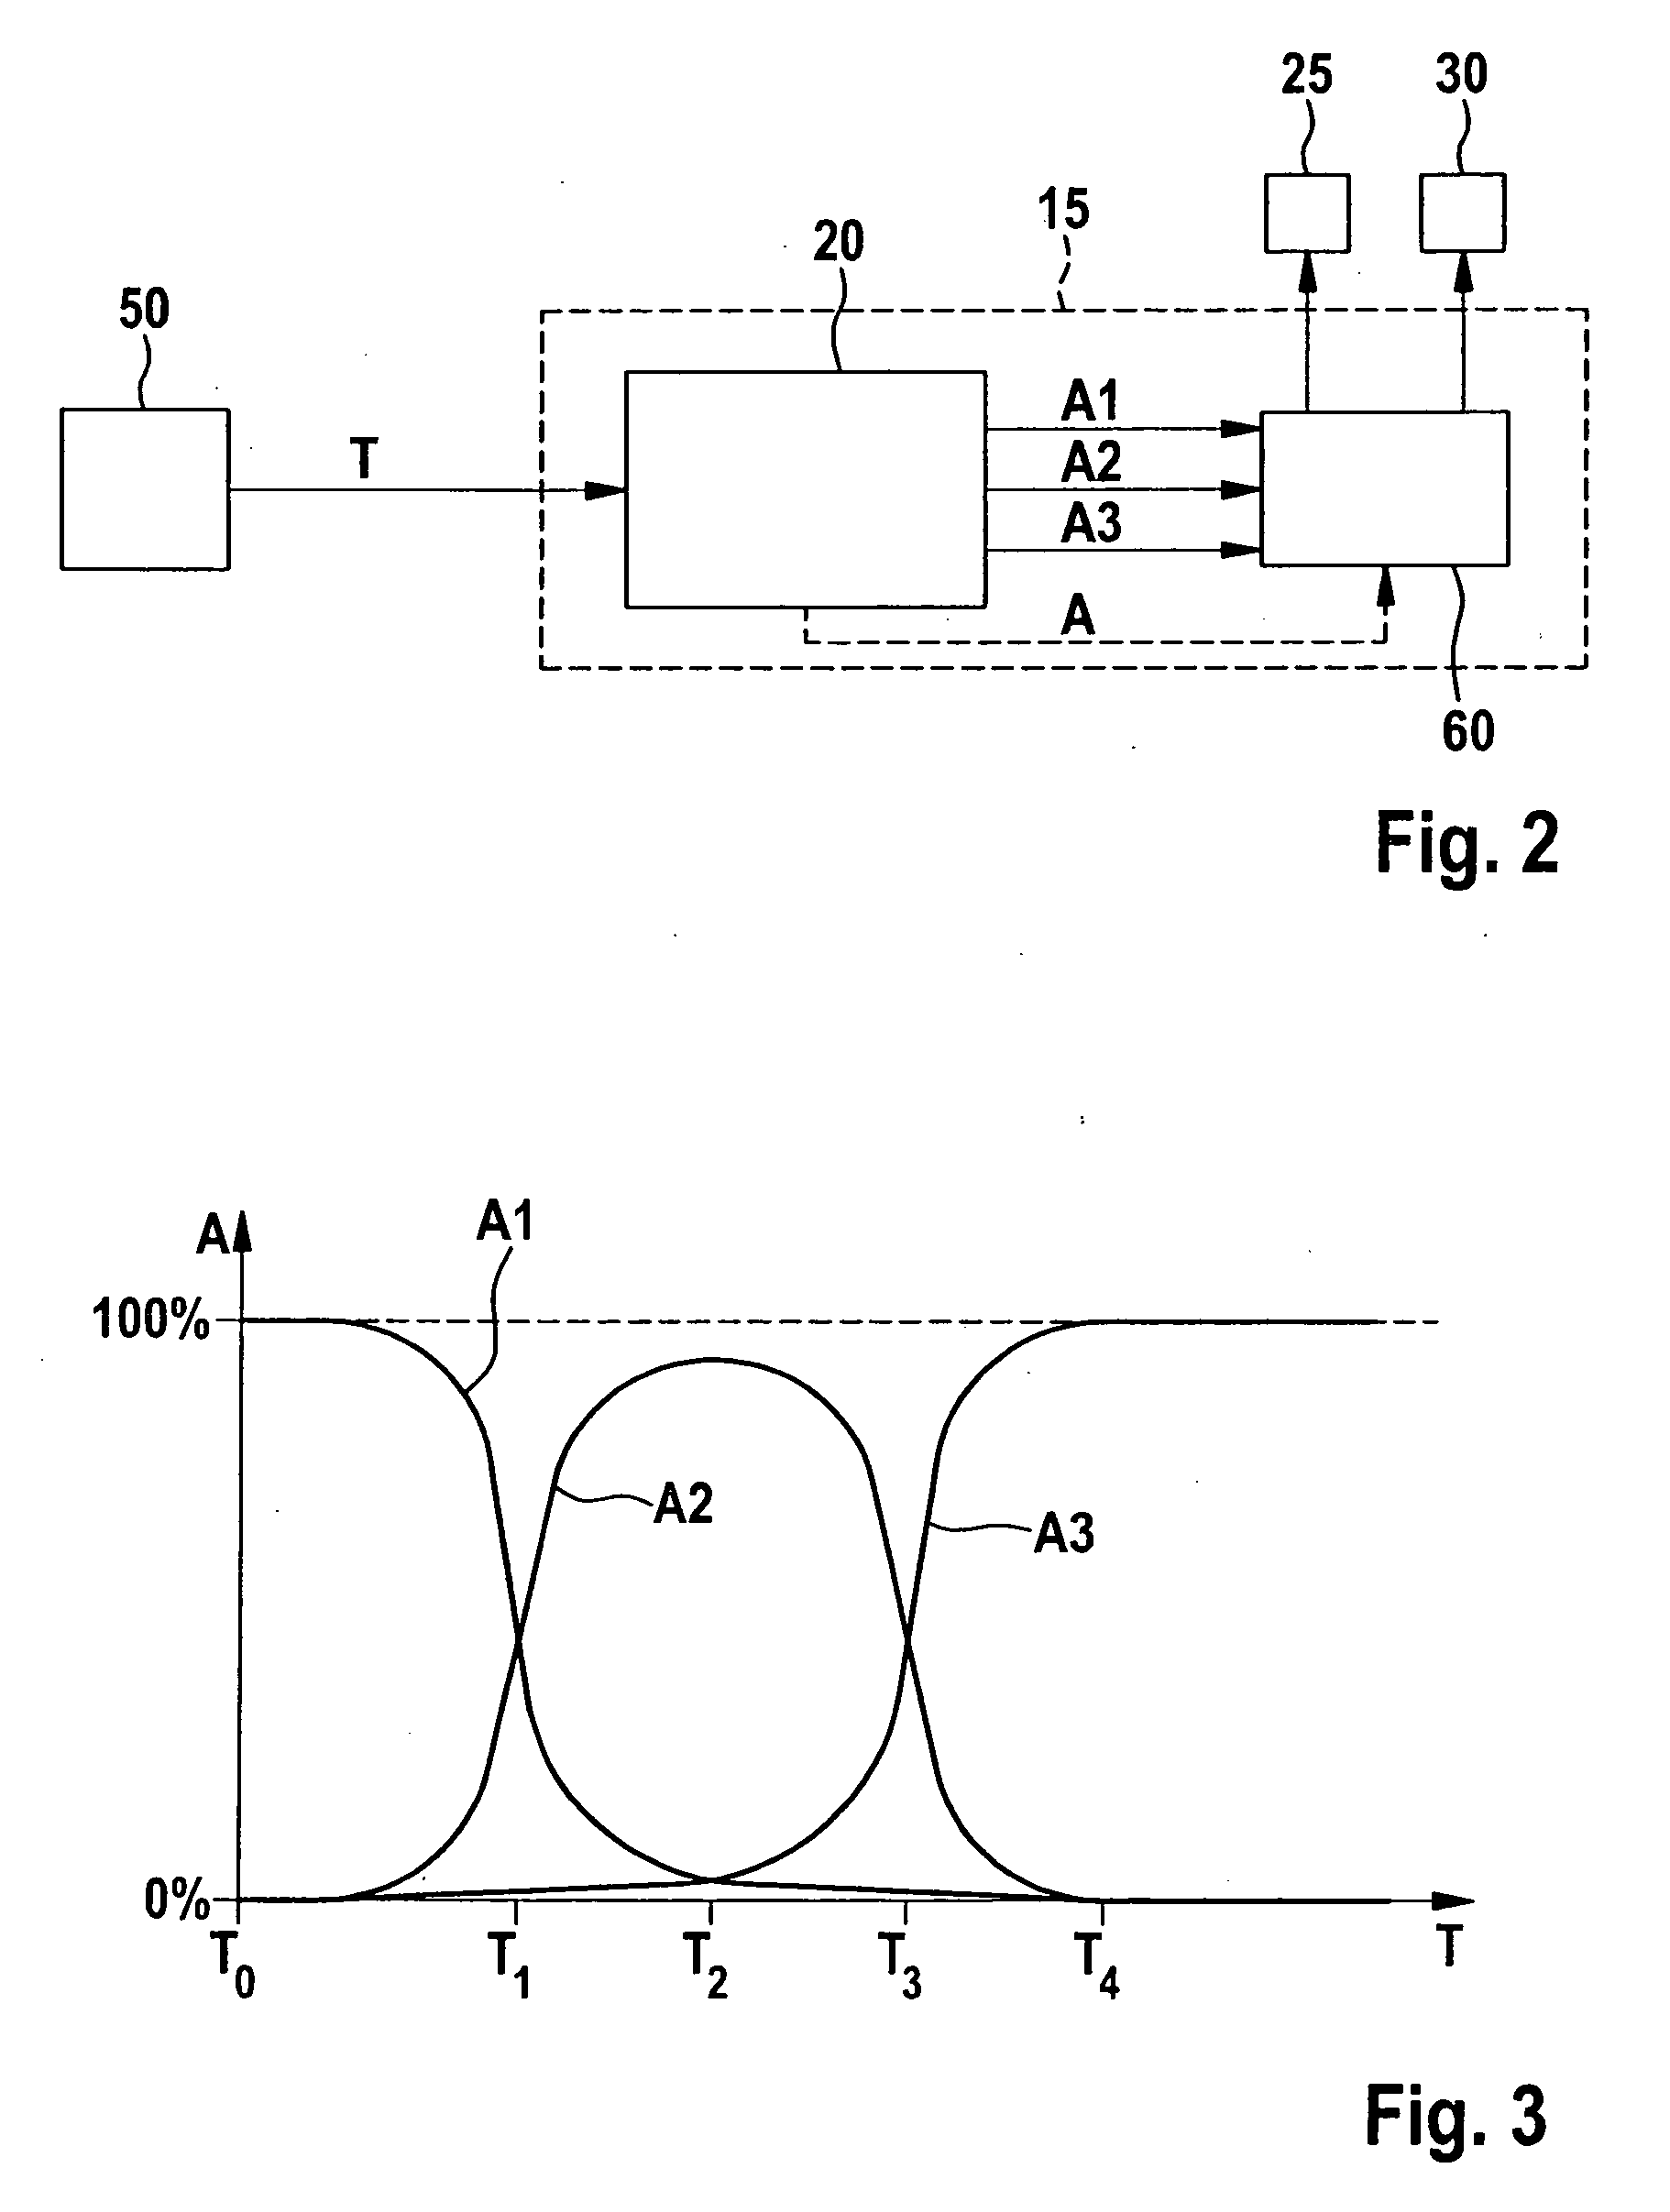 Method and device for operating an internal combustion engine